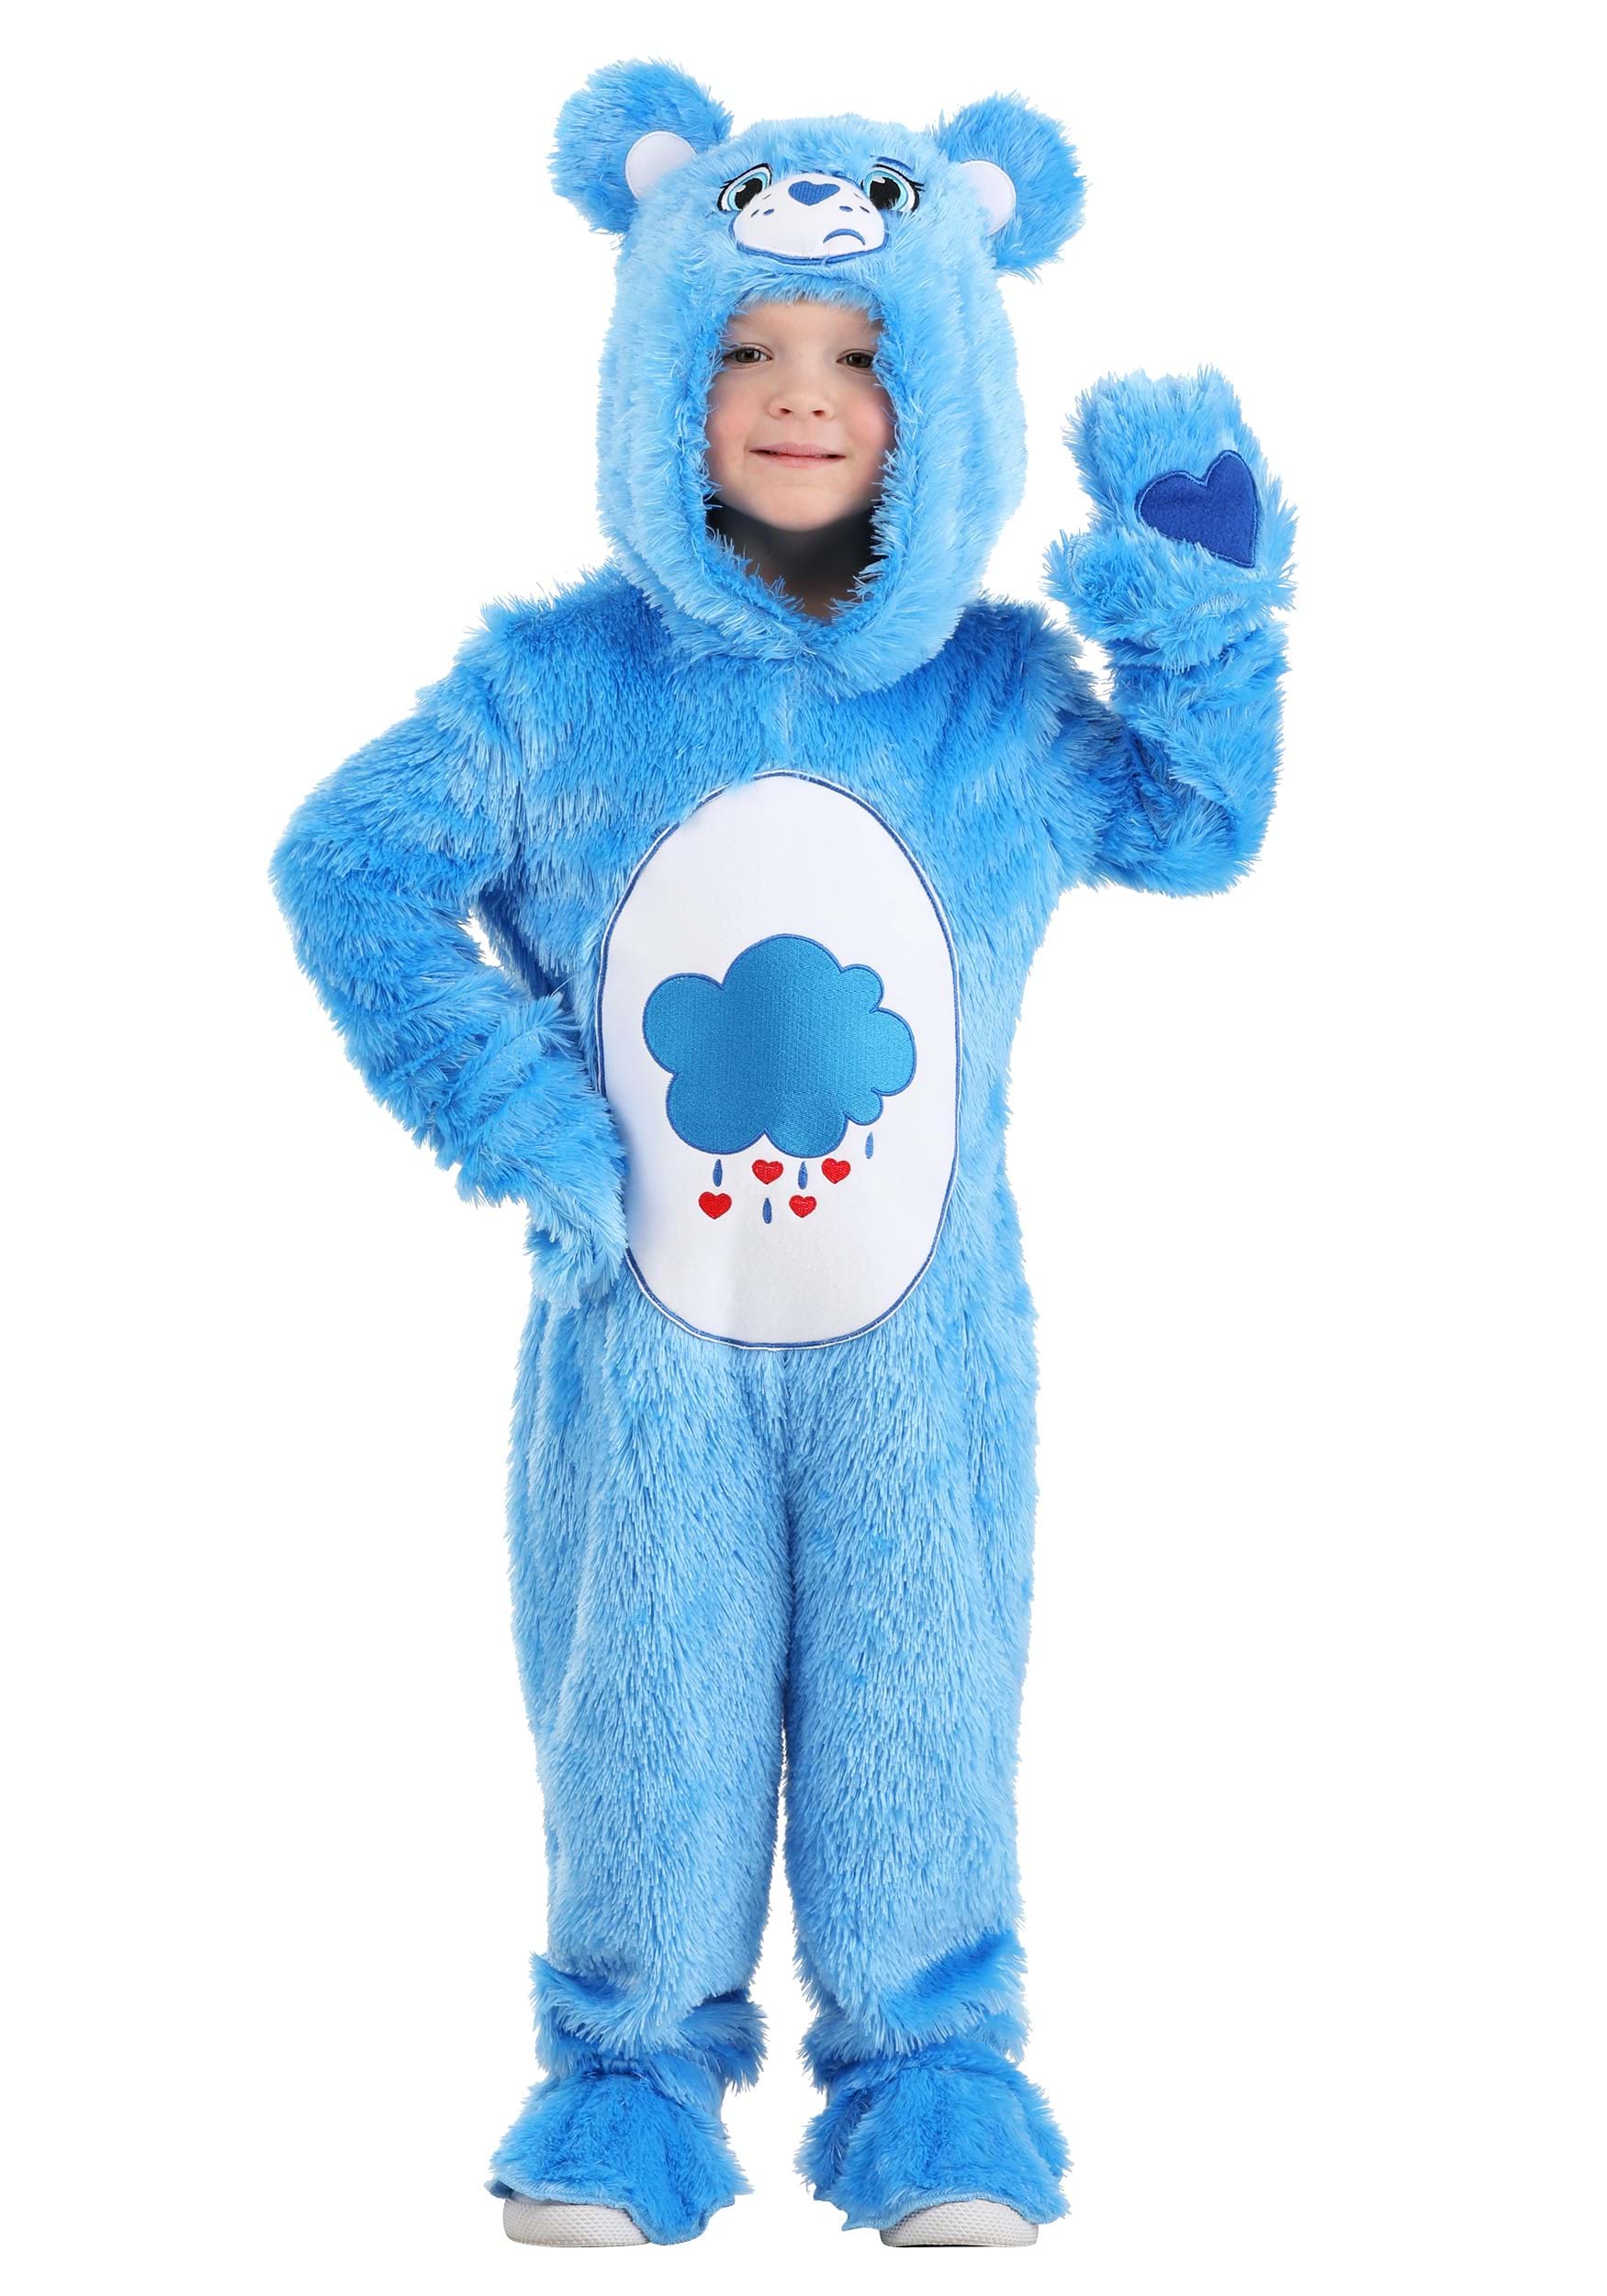 Photos - Fancy Dress CARE FUN Costumes  Bears Toddler Classic Grumpy Bear Costume for Toddlers B 